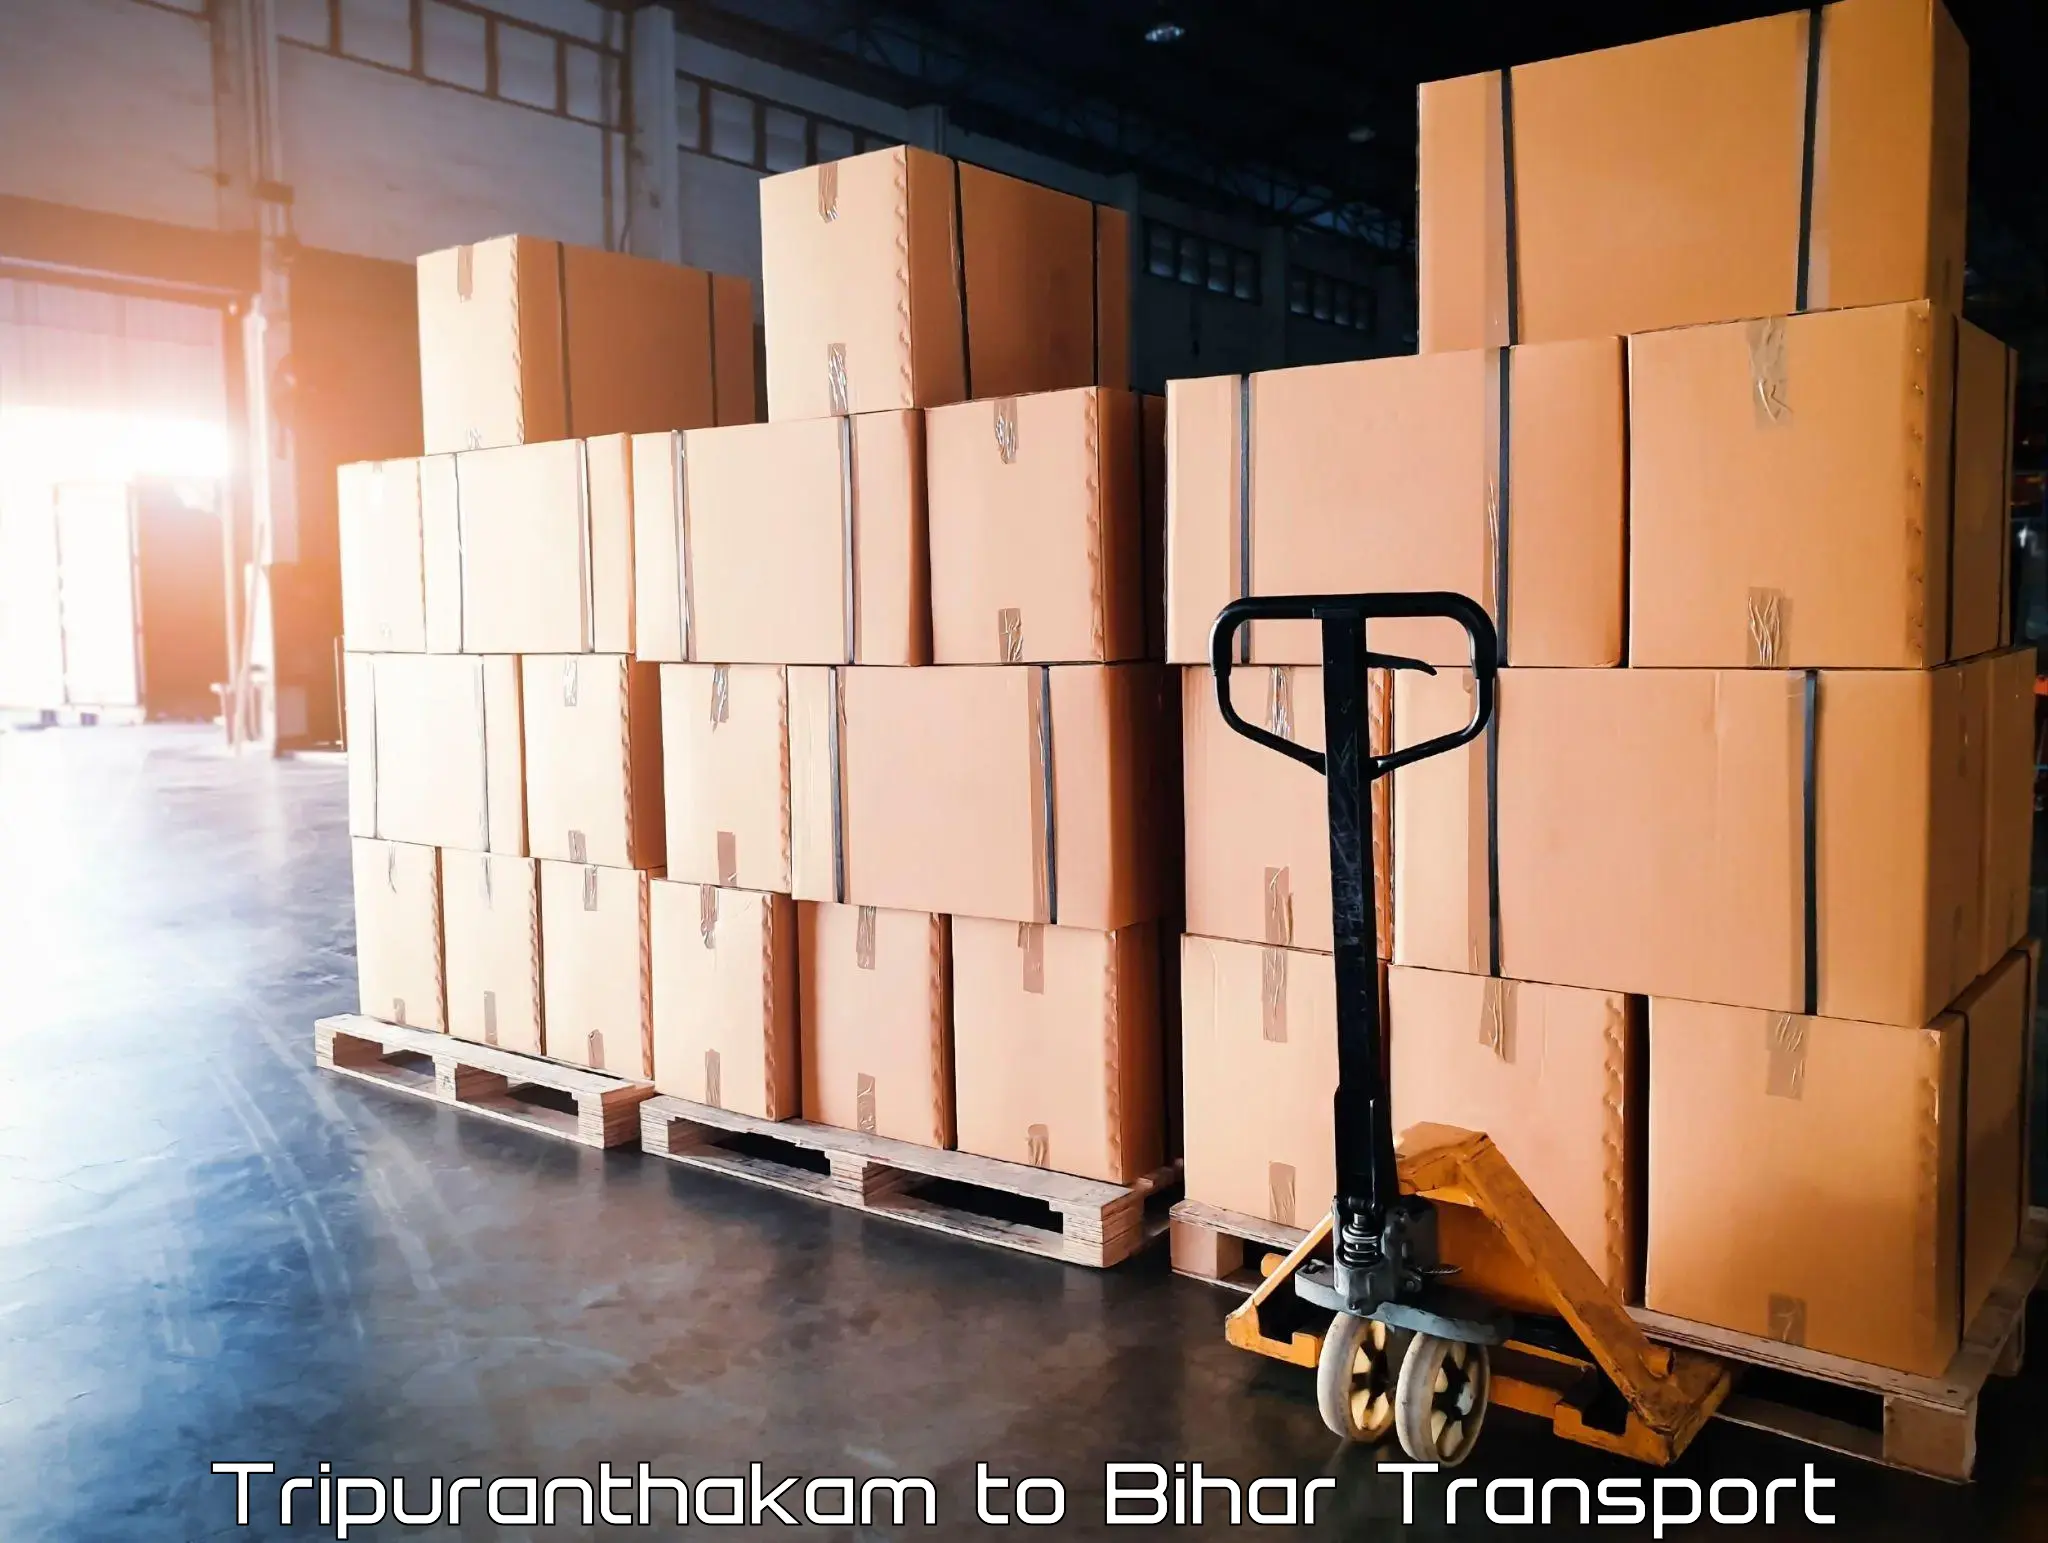 Delivery service Tripuranthakam to Dhaka